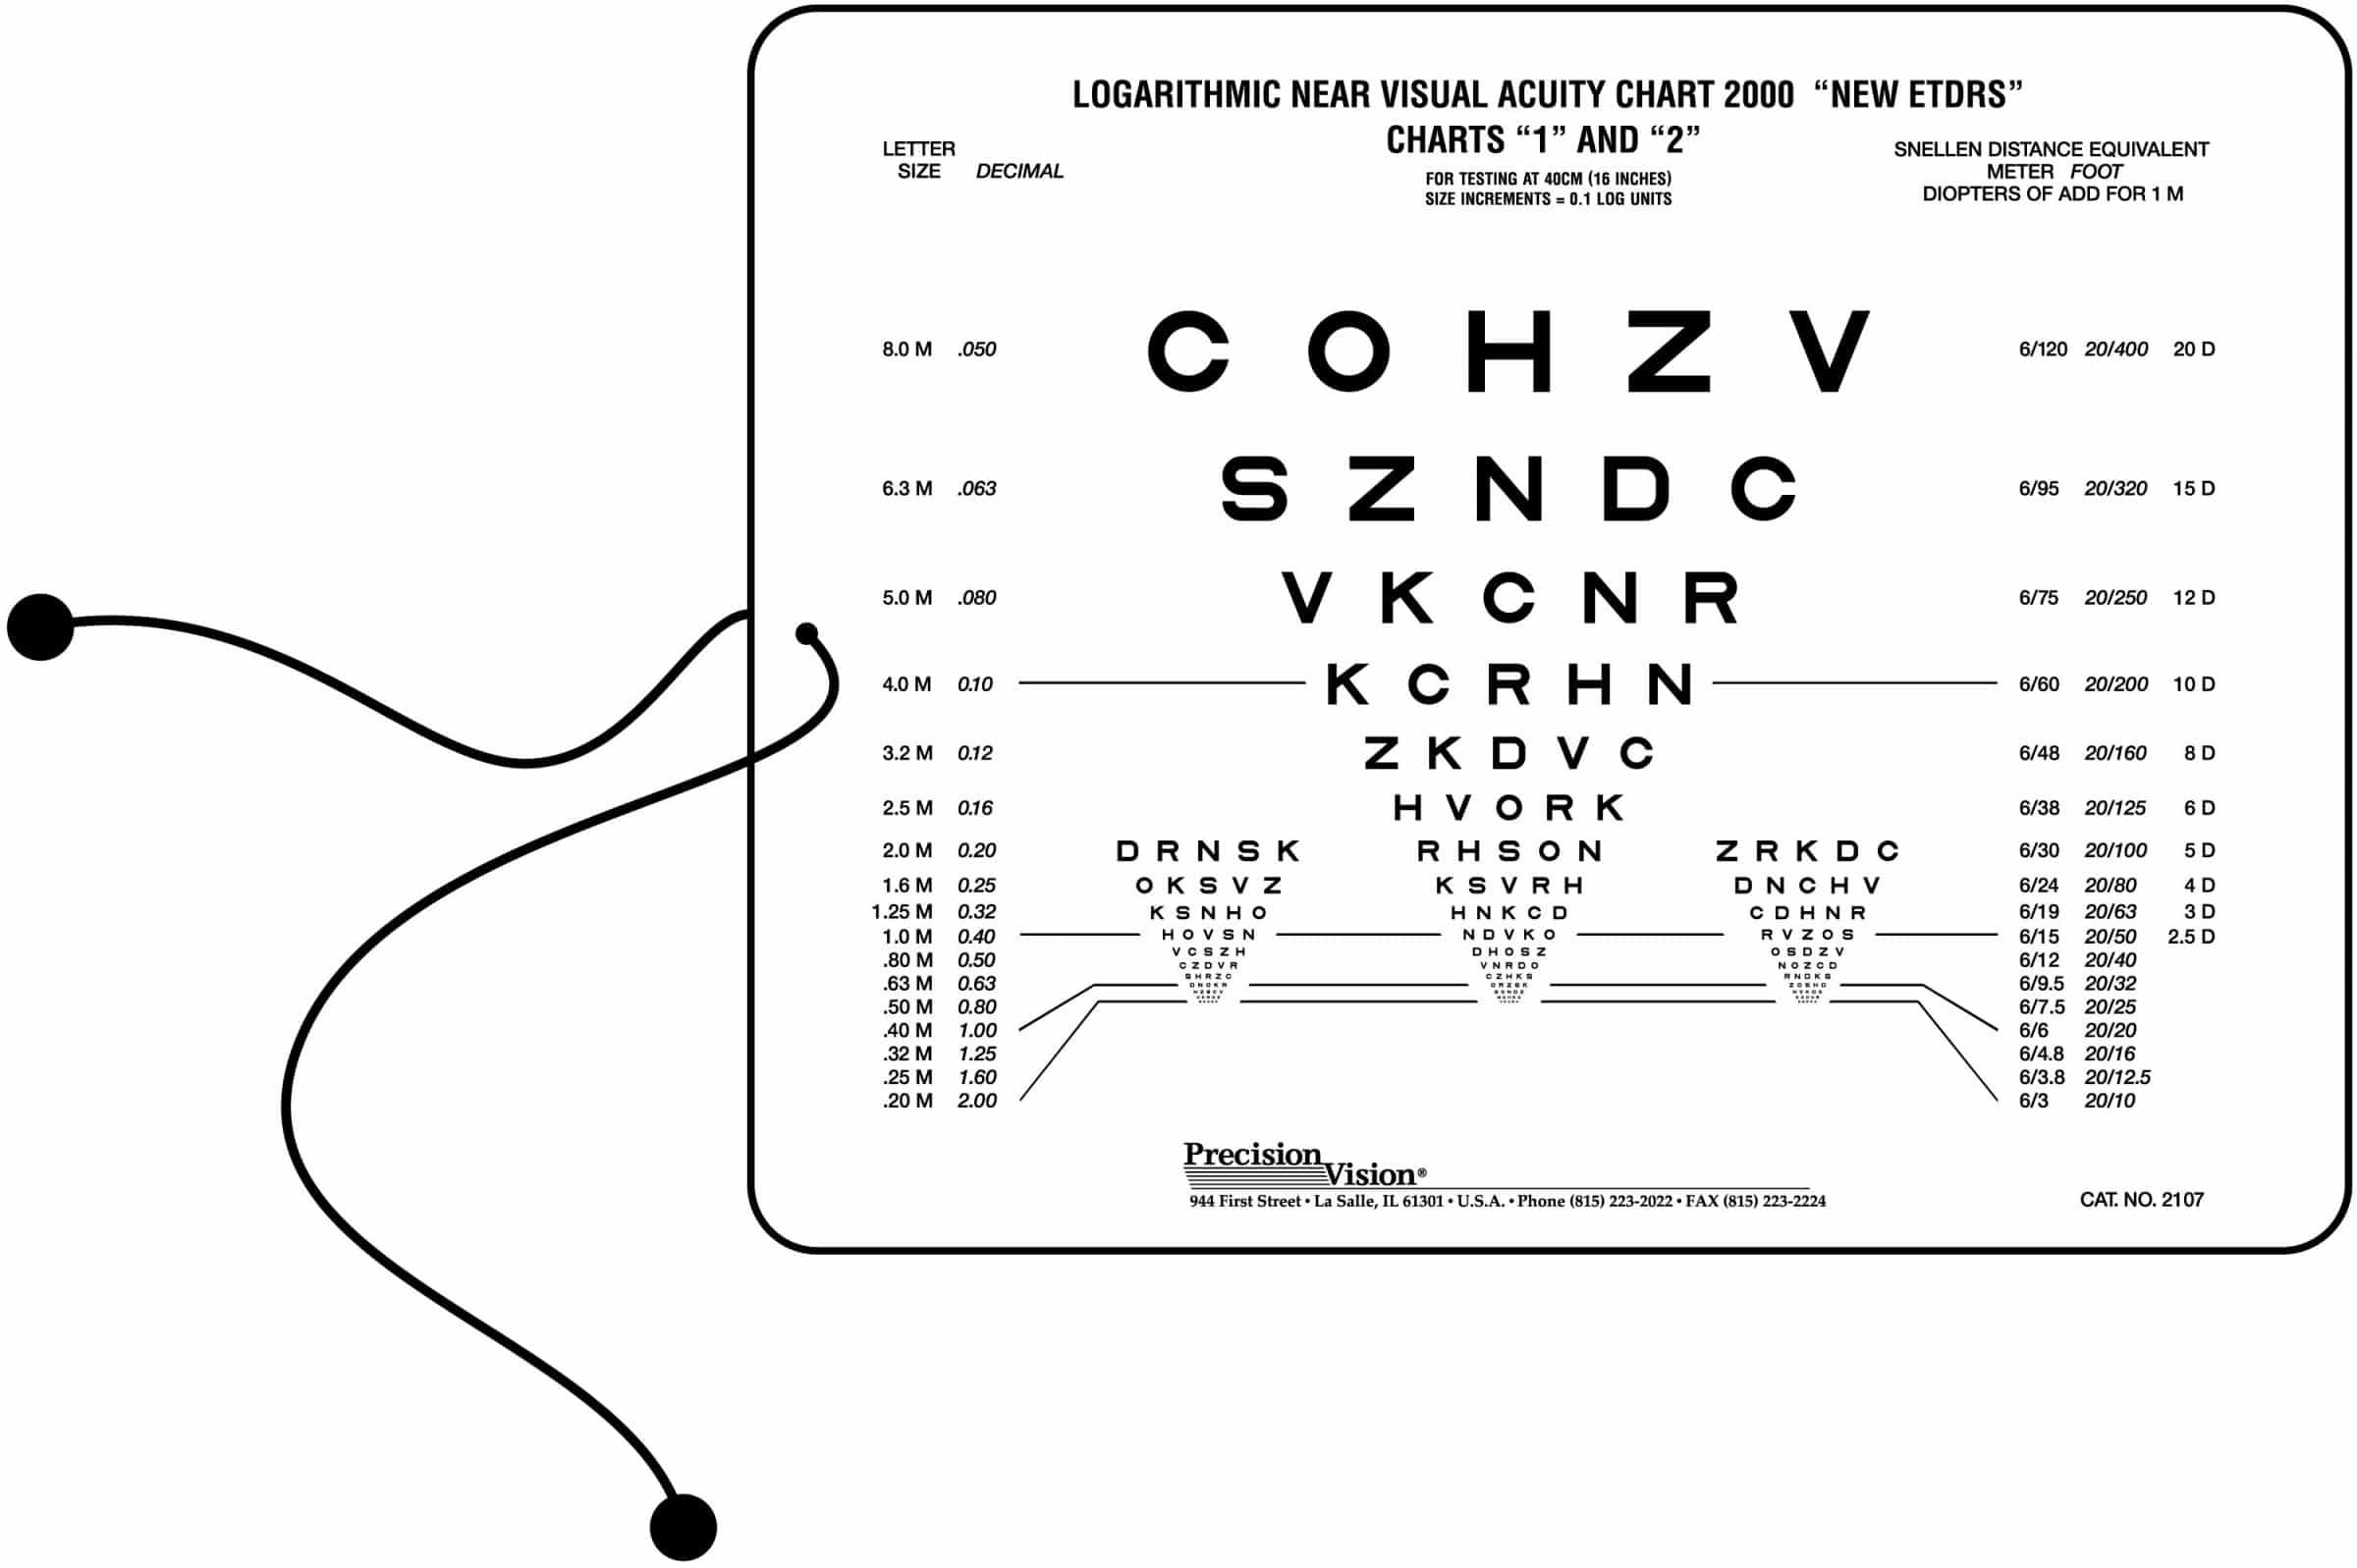 Intermediate Vision Acuity Conversion Chart